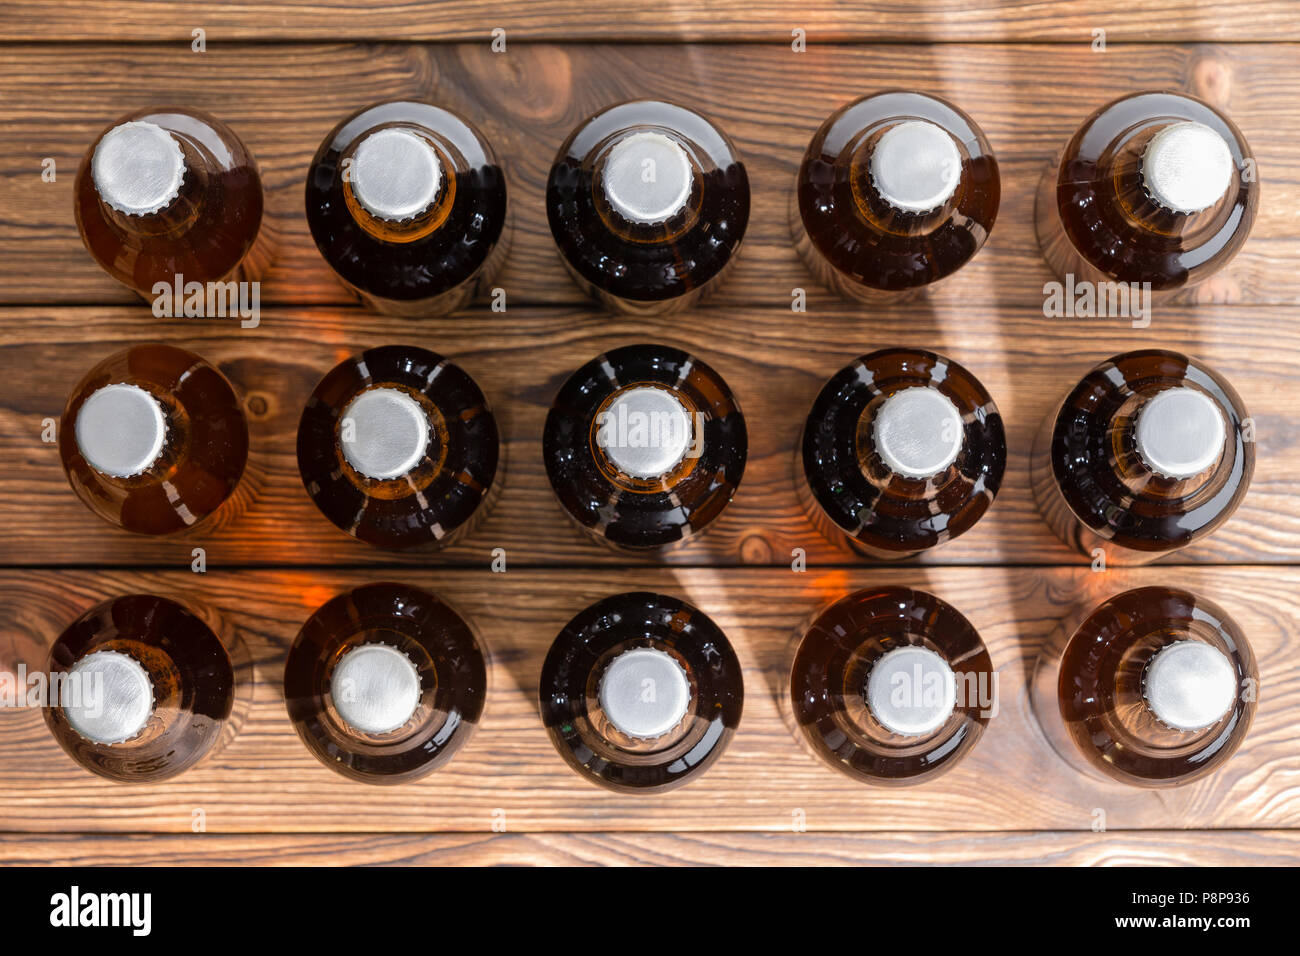 15 neatly aligned rows of bottled craft beer capped with bottle tops viewed top down on a wooden table Stock Photo